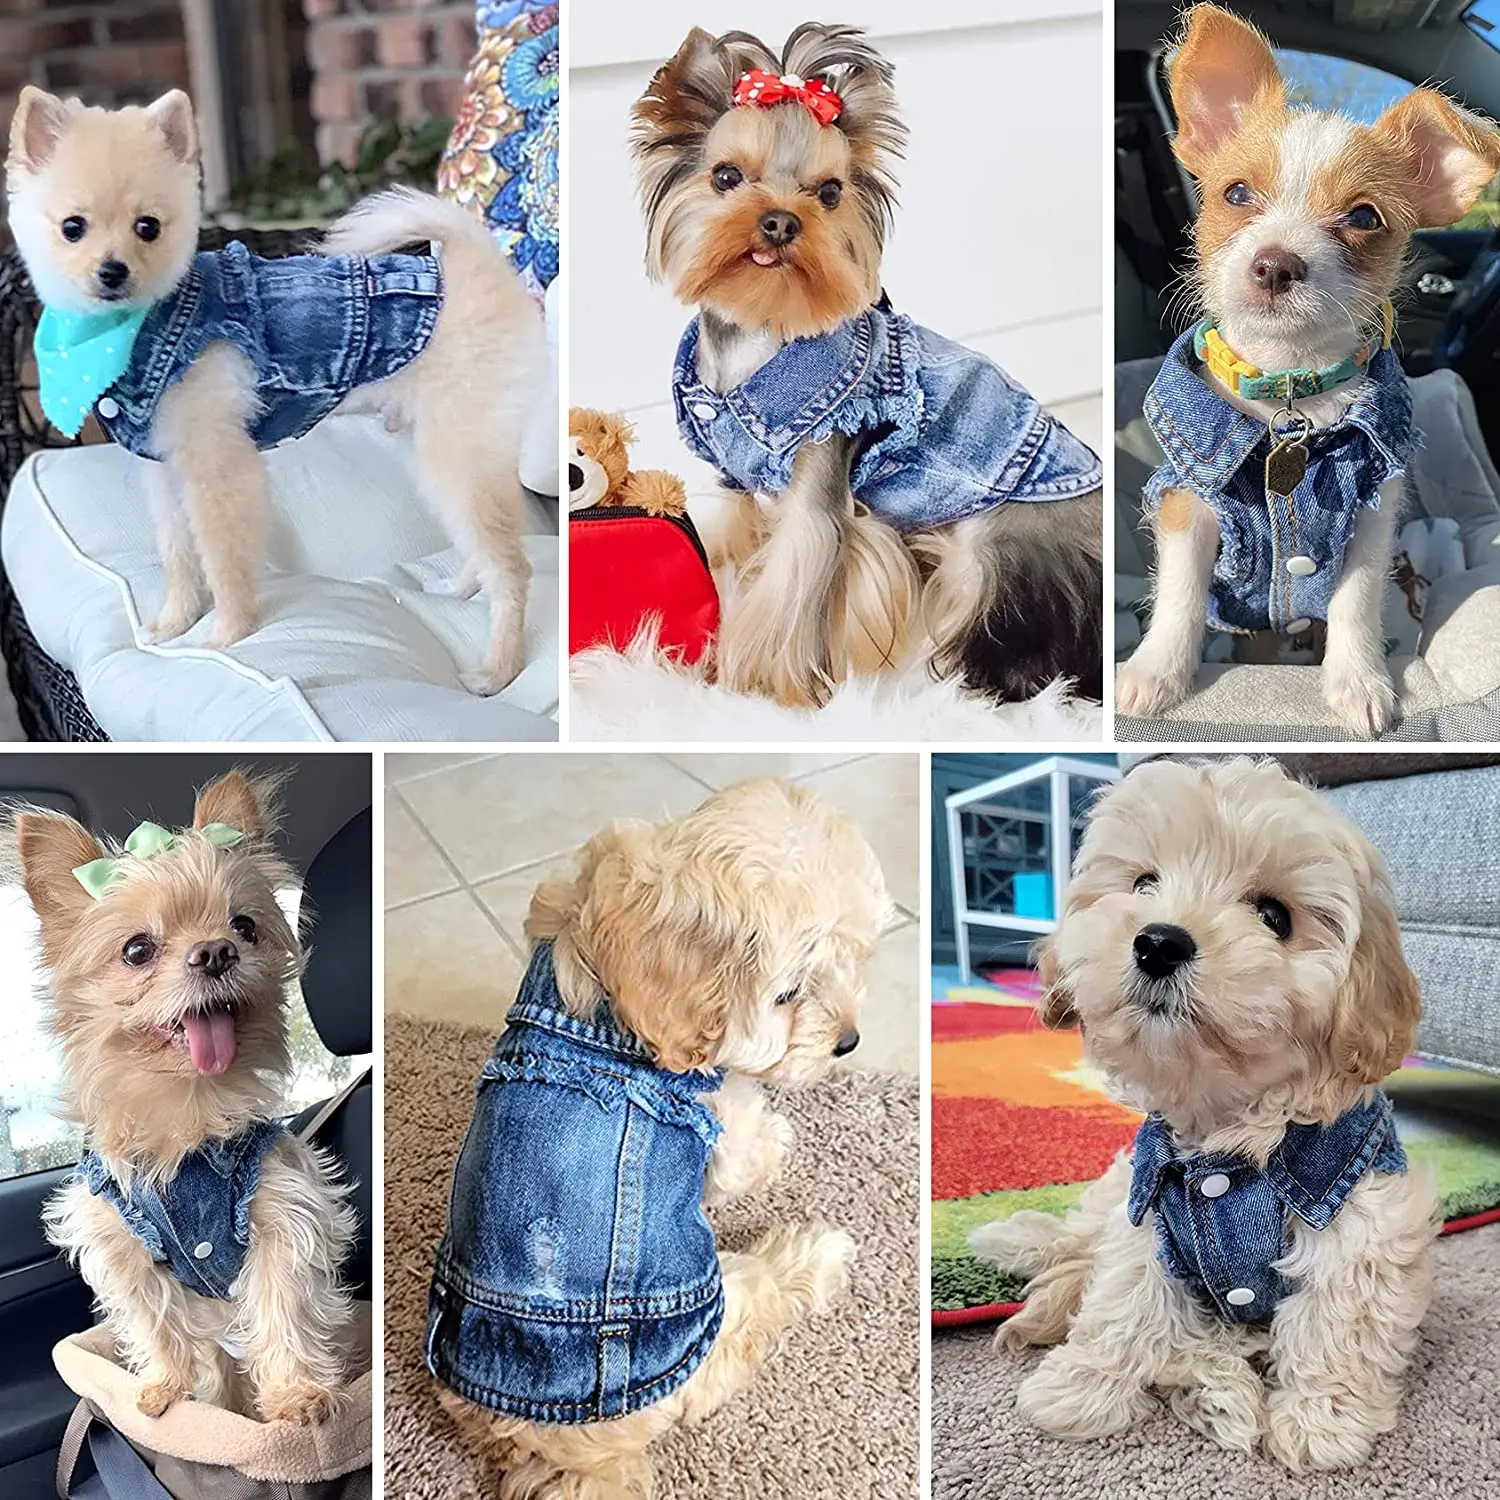 LKEX Dog Jean Jacket Blue Denim Shirt Classic Lapel Vest Coat Costume Puppy T-Shirt Washed Pet Clothes for Small Medium Dogs Boy Girl Comfort Tank Top Shirts Cool Apparel Cute Cat Outfits 